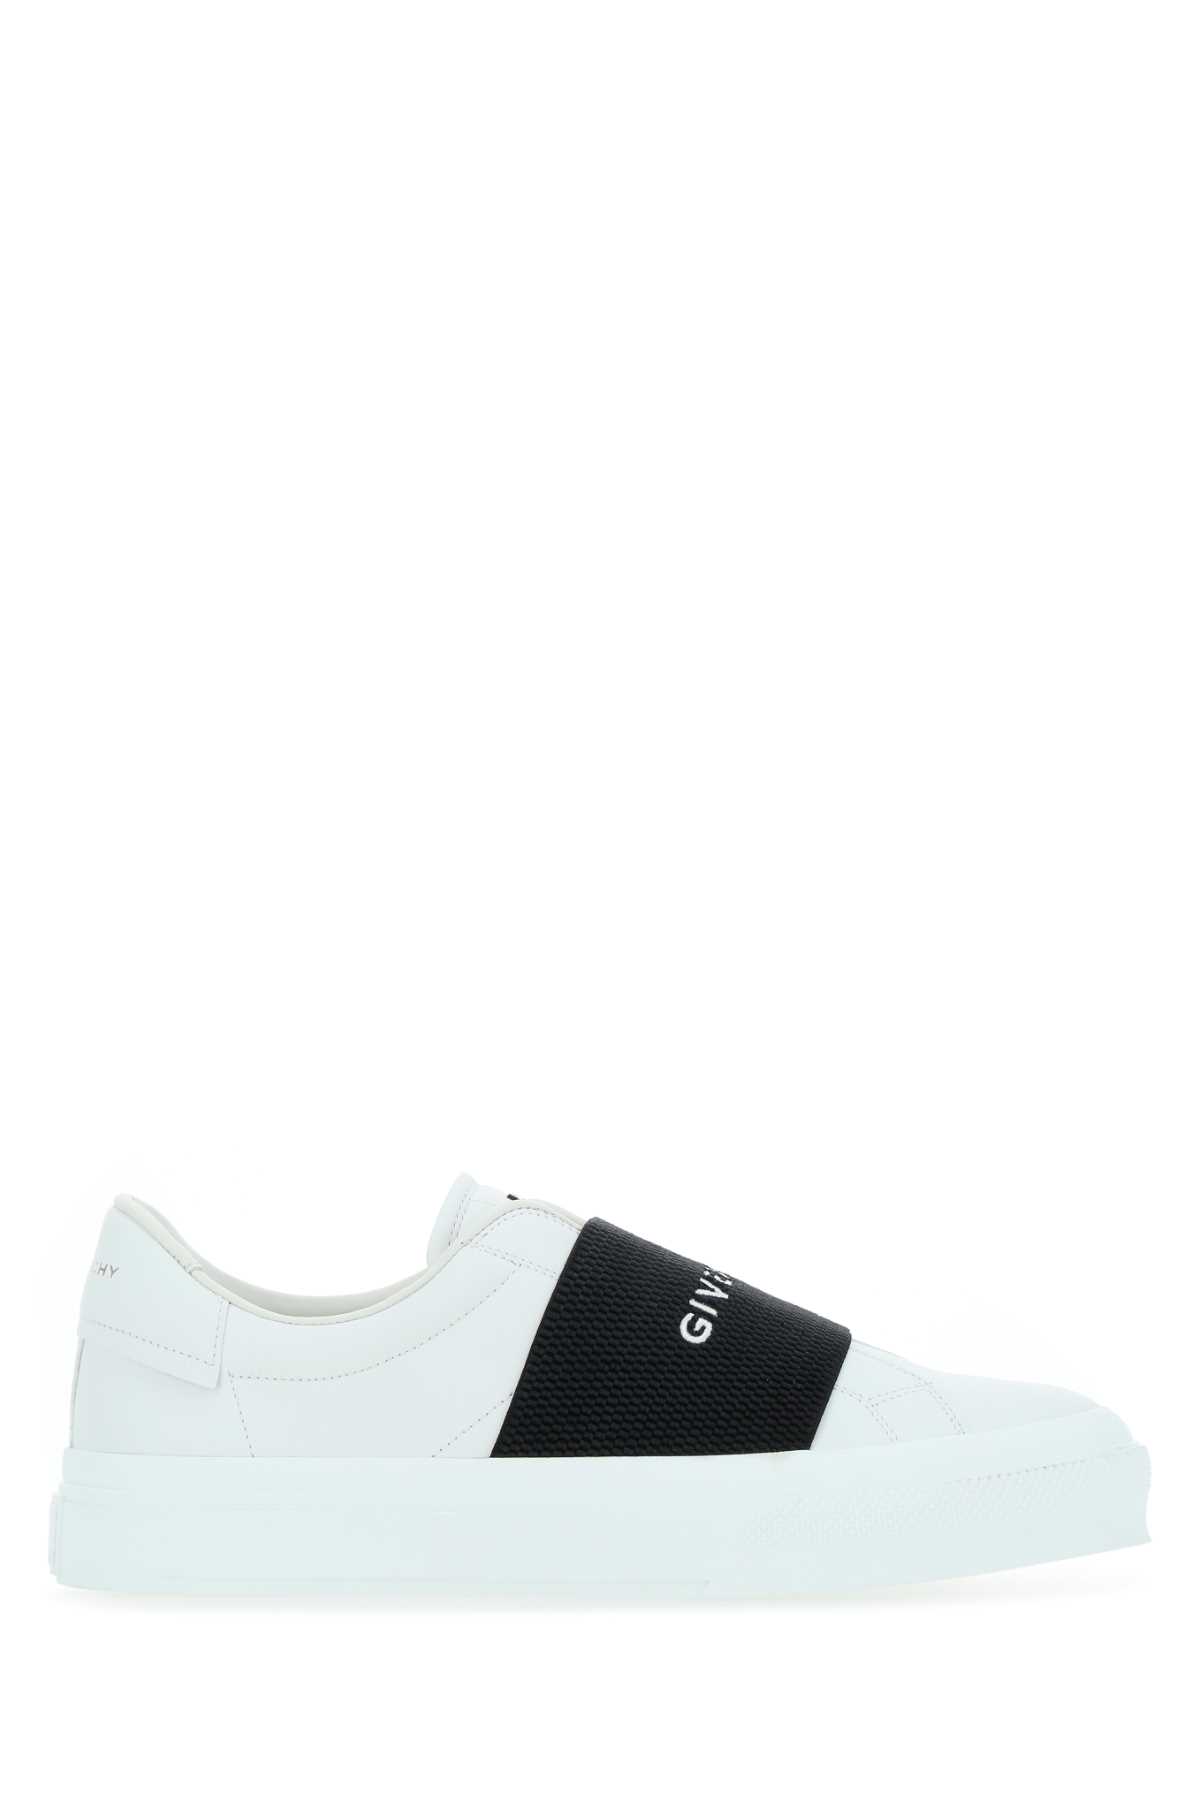 Shop Givenchy White Leather City Slip Ons In 116